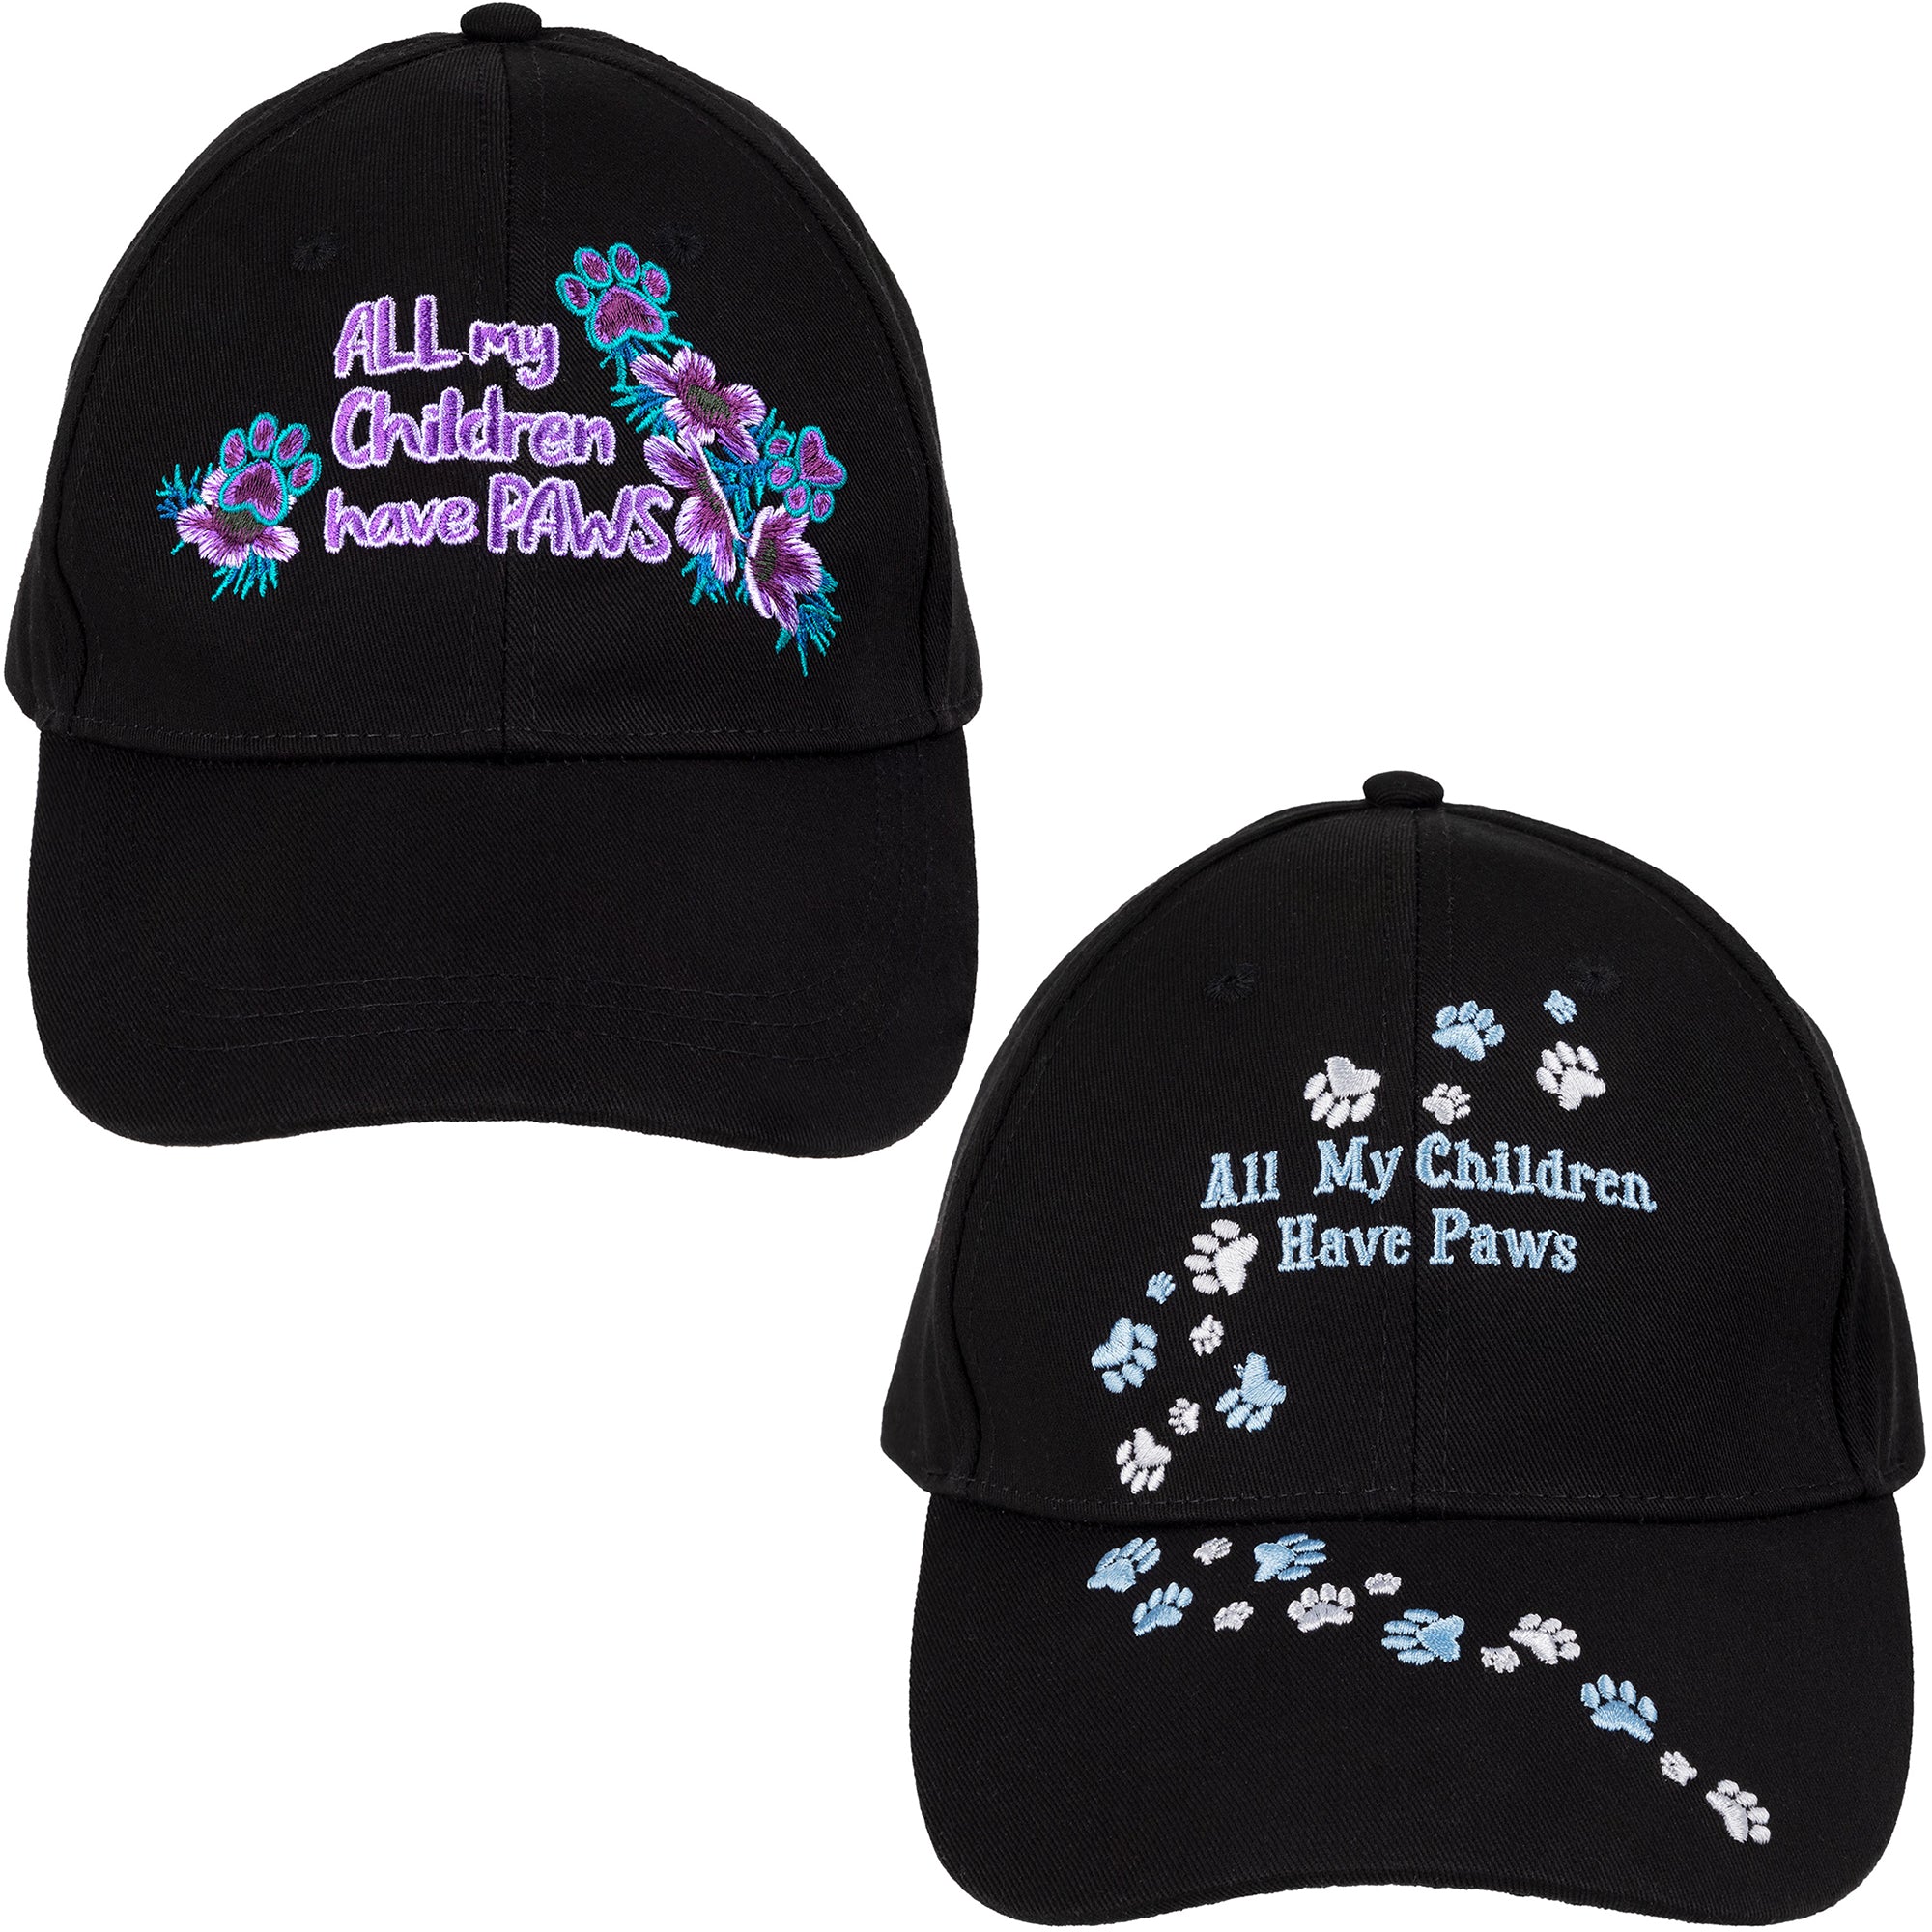 All My Children Have Paws Embroidered Baseball Hat - Blue & White